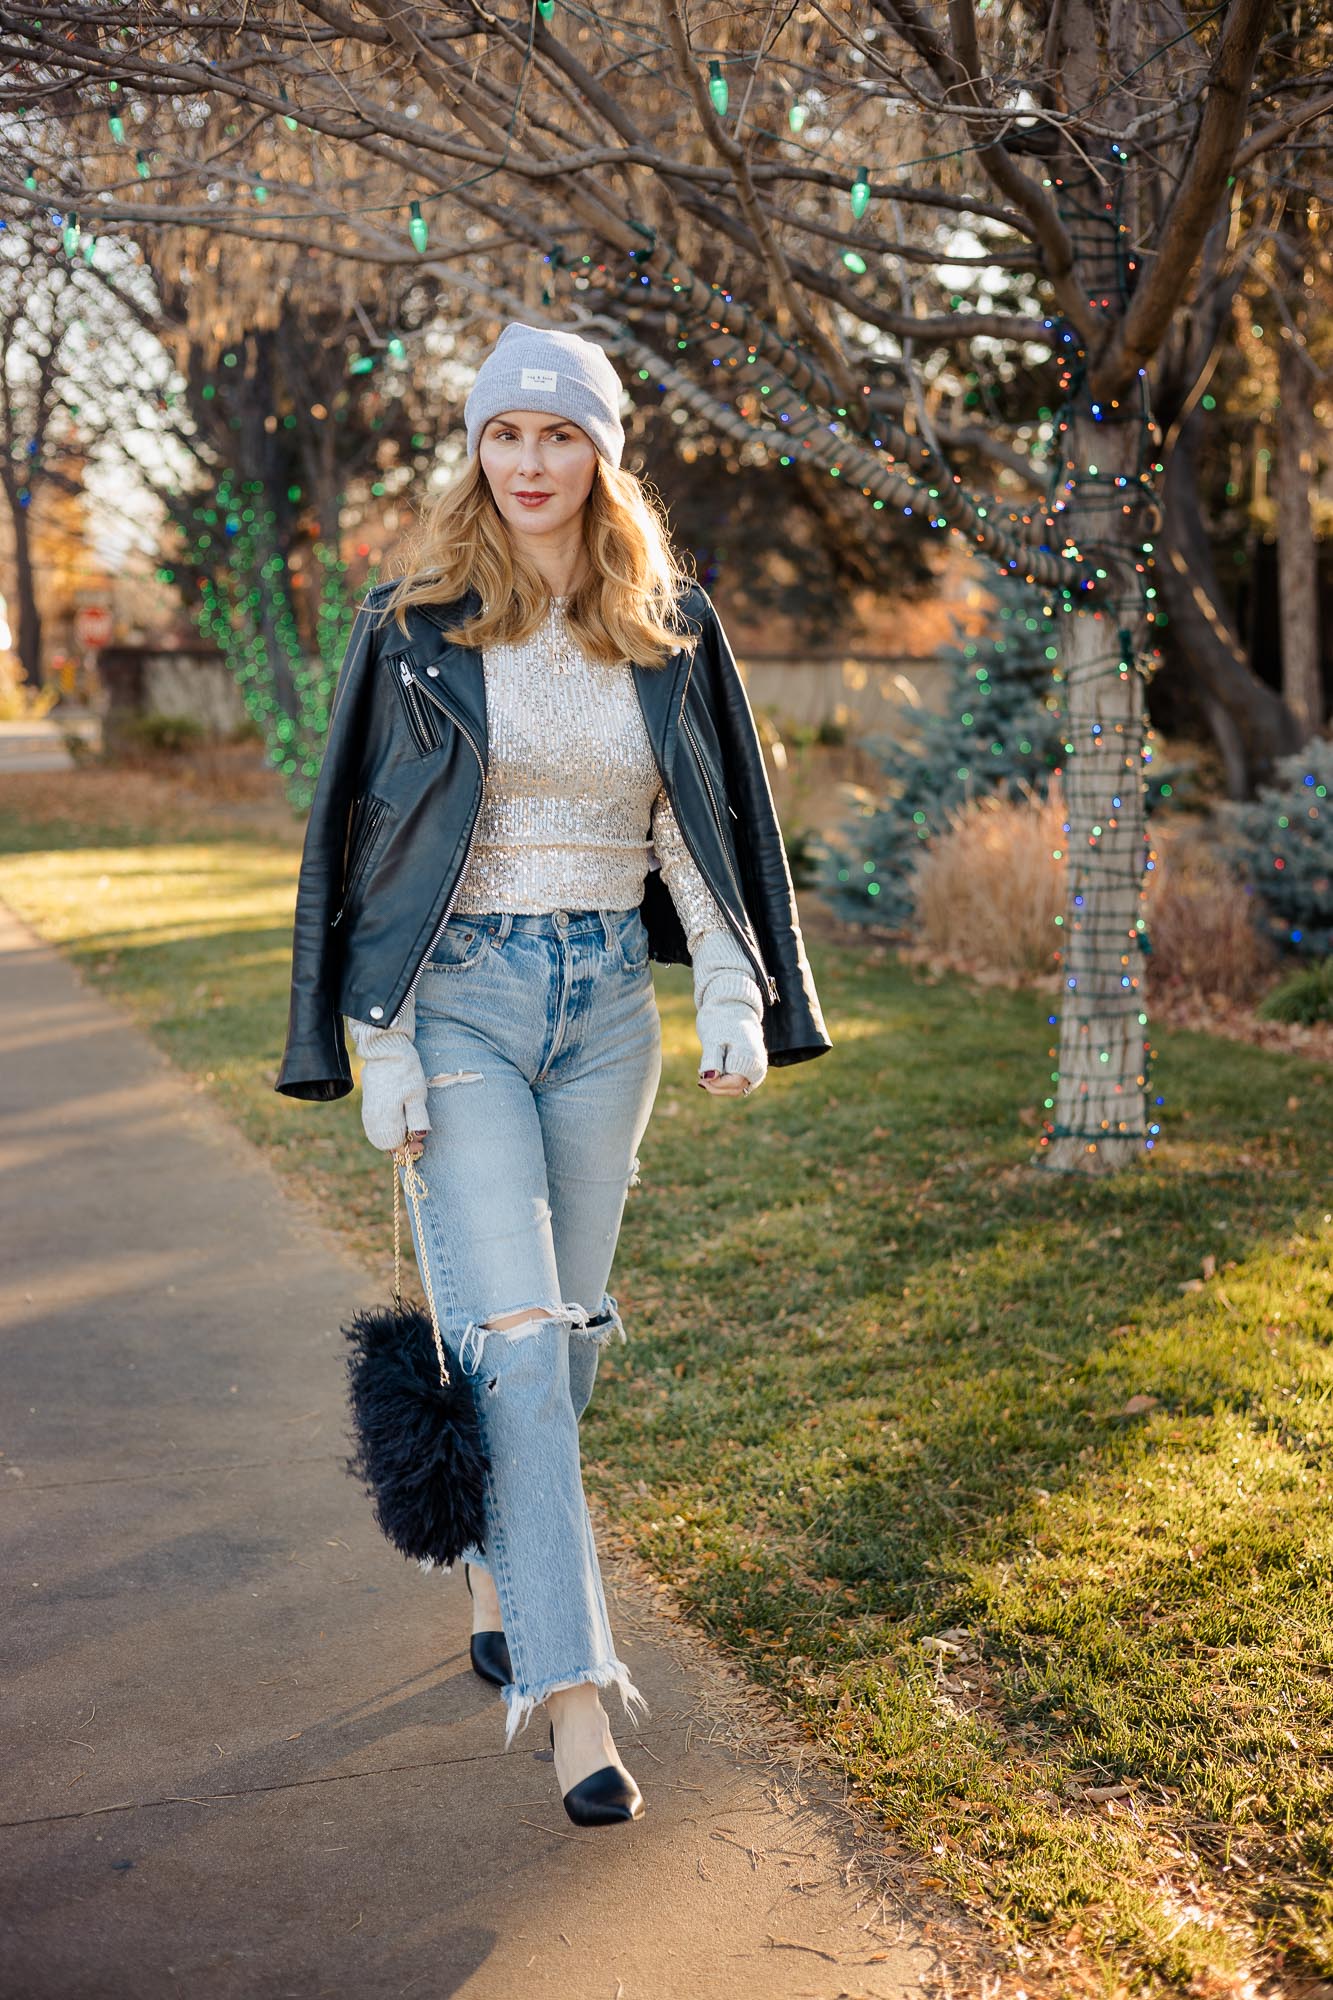 The Festive Free People Sequin Top (+ Holiday Style Advice)